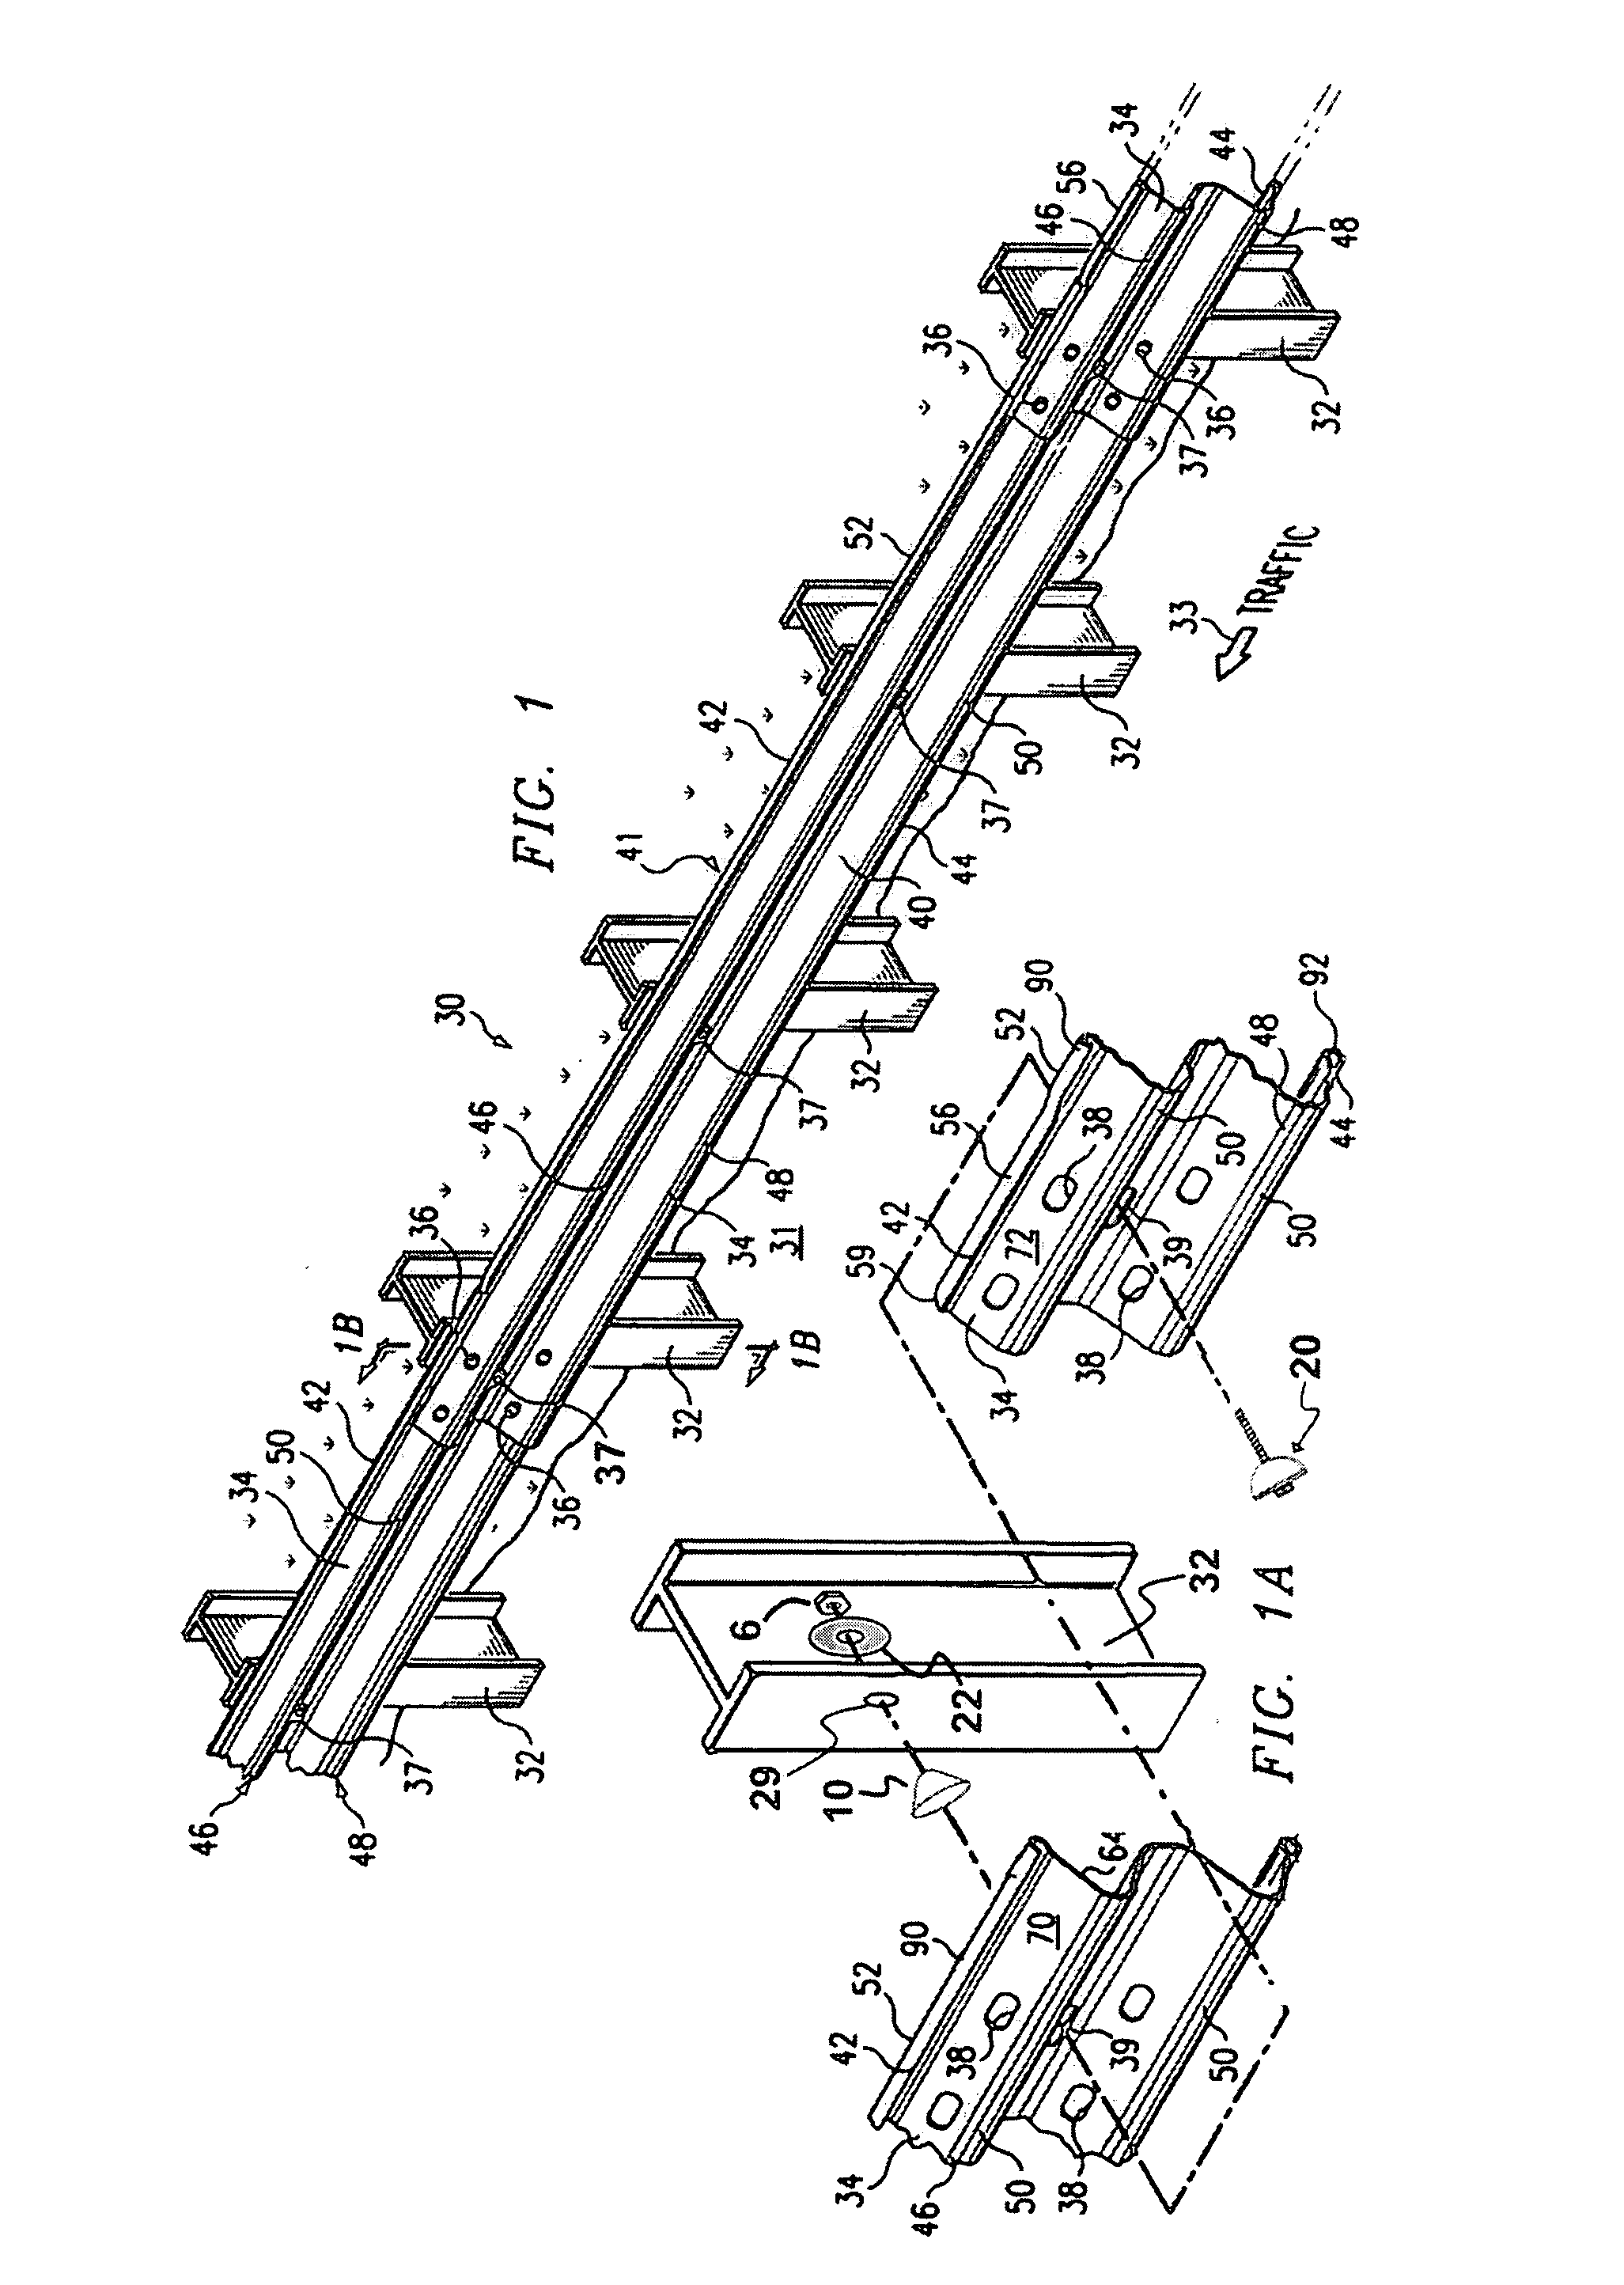 Releasable highway safety structures